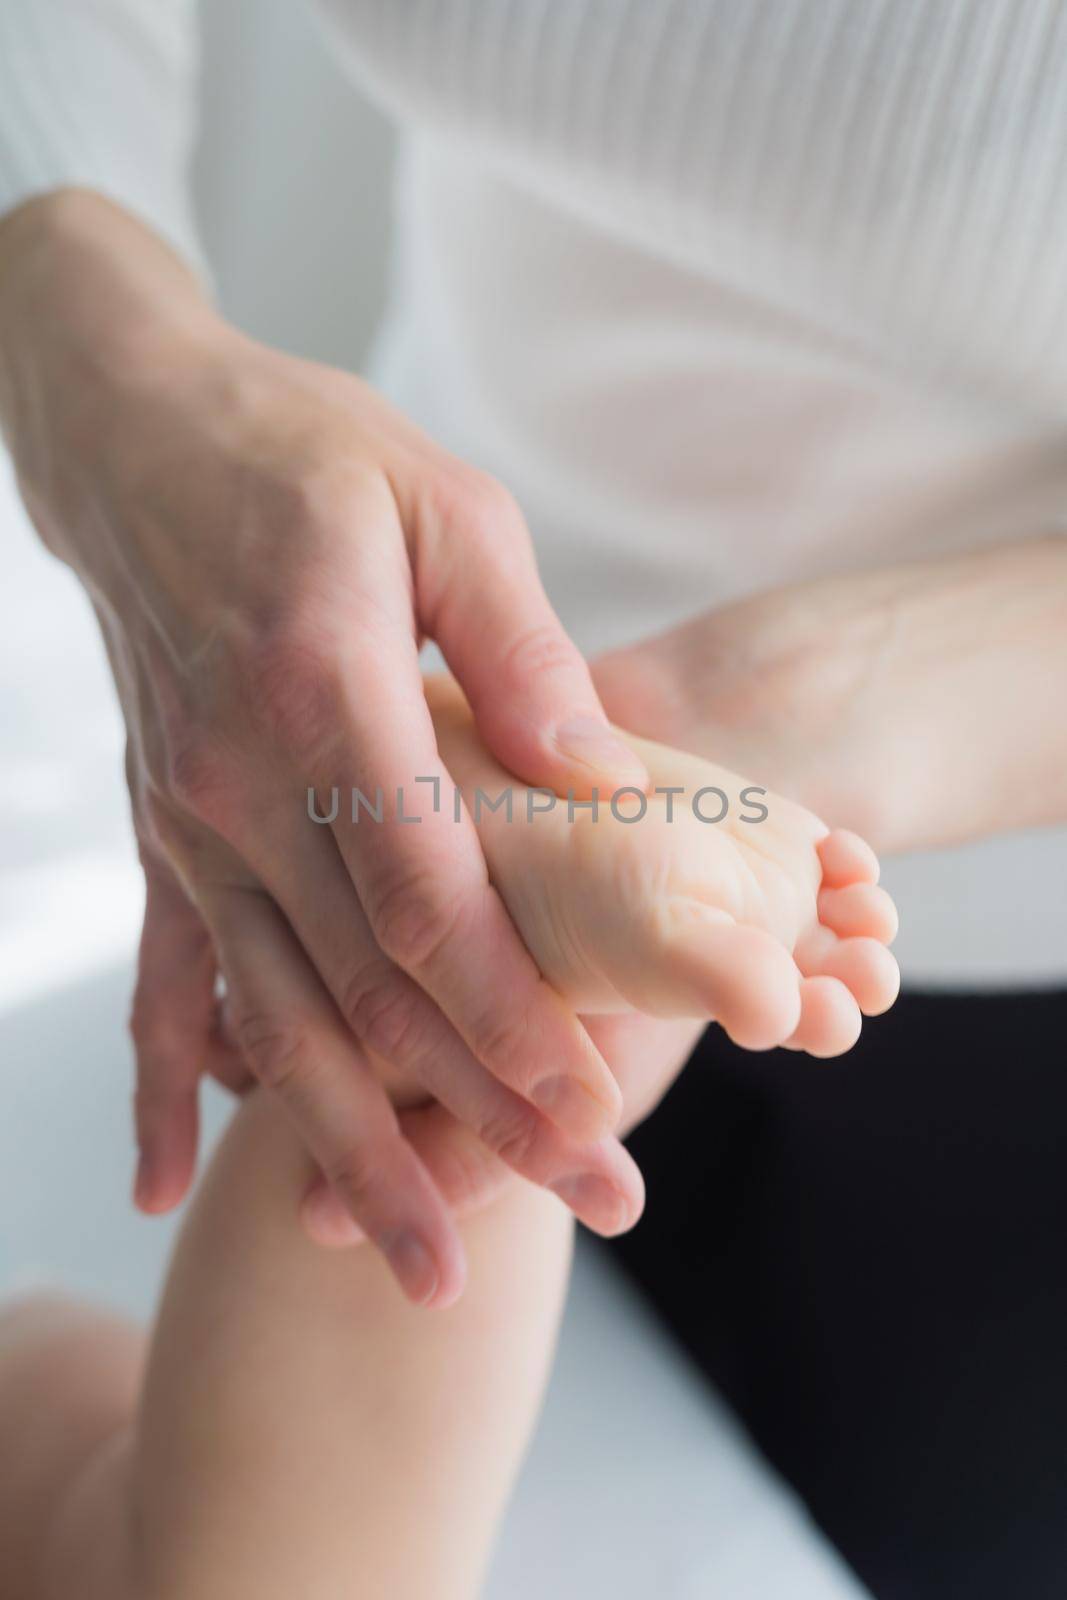 Mom gives her baby a leg and foot massage. Close-up. by Yurich32